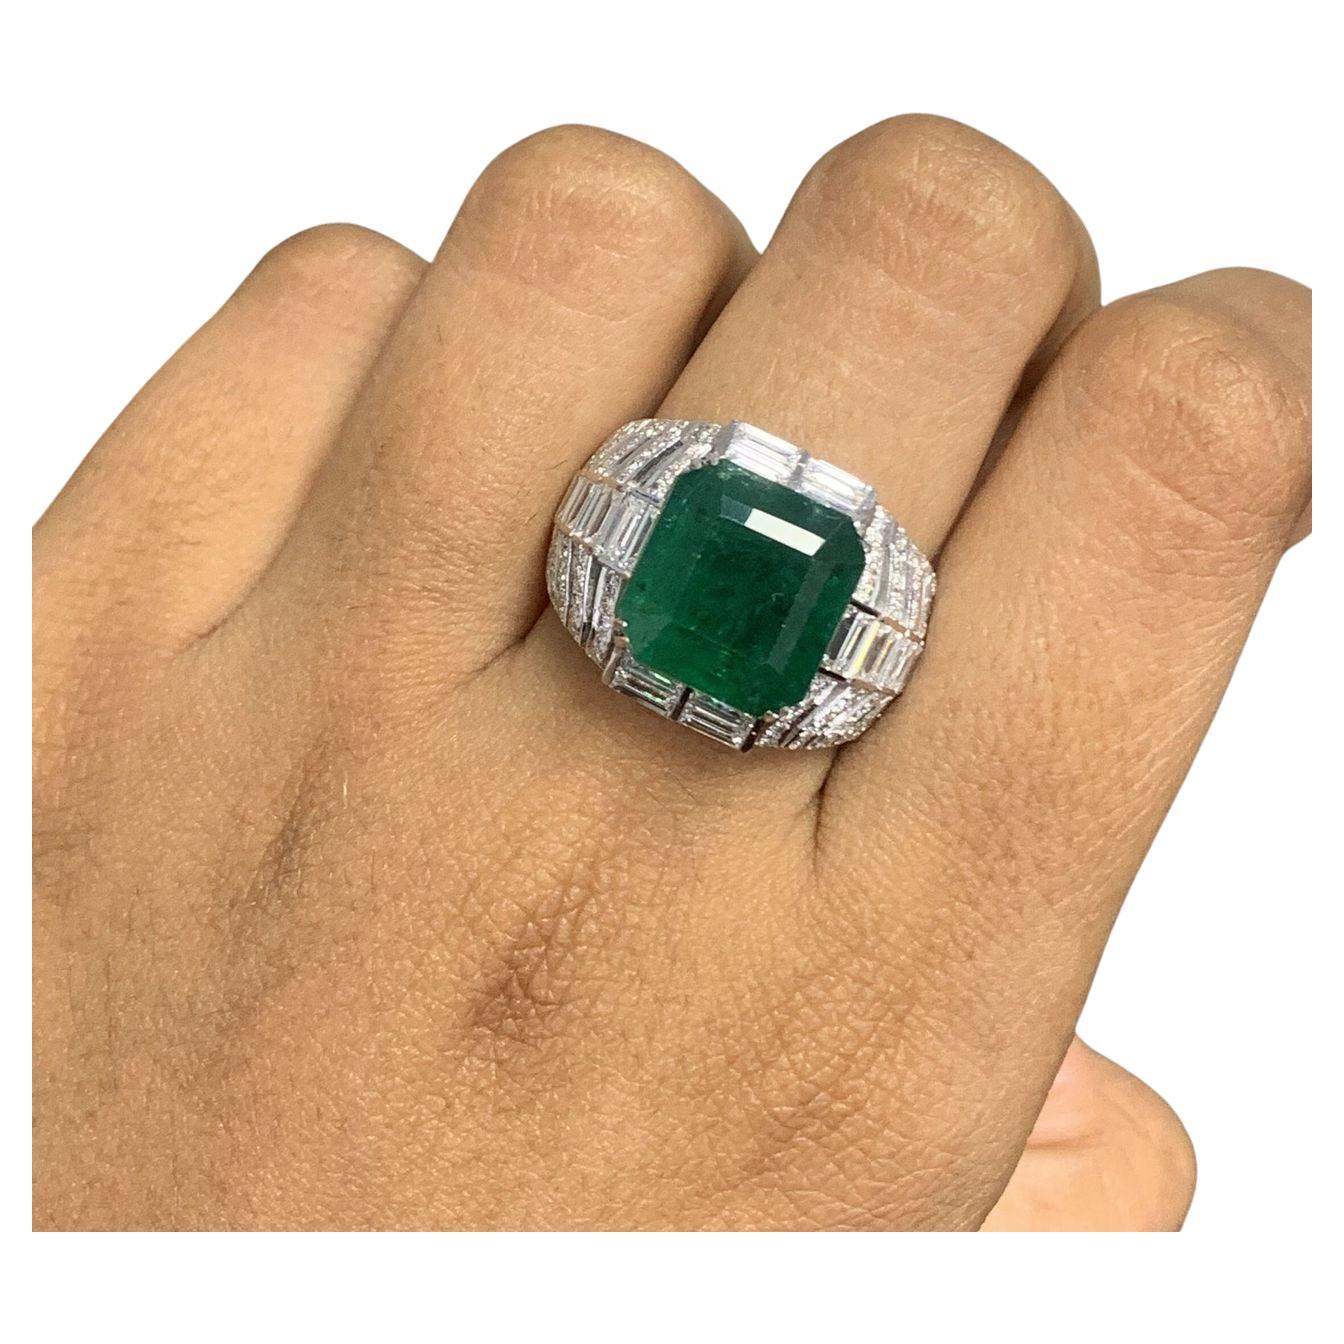 Prepare to be mesmerized by sheer elegance and sophistication. Behold the stunning Emerald & Baguette Diamond Ring, a testament to timeless beauty and impeccable craftsmanship.

Cut to close-up shots of the ring, highlighting the brilliance of the